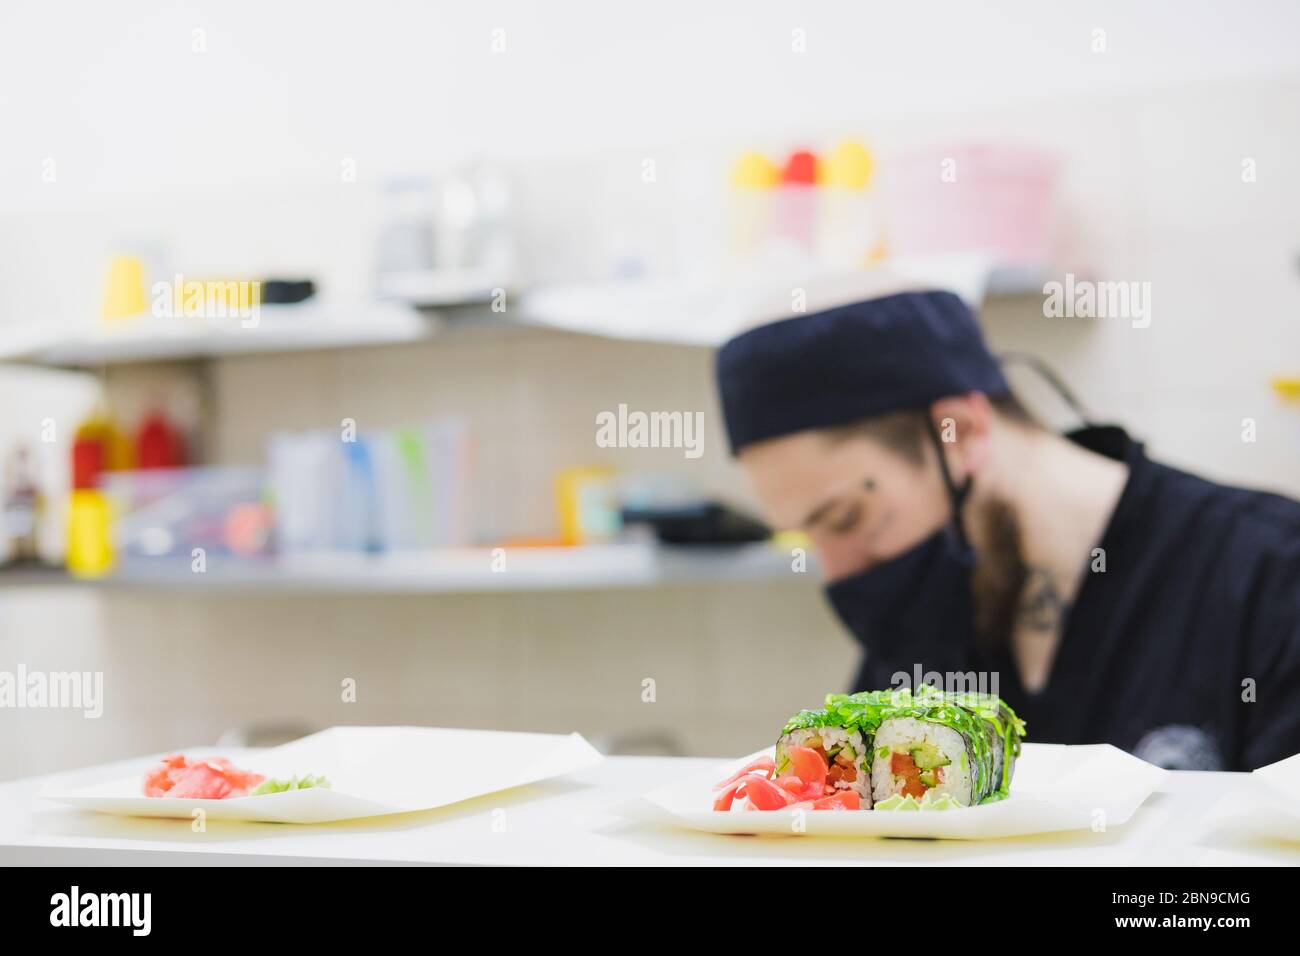 Vegan sushi rolls in the commercial take away food kitchen. Fast food, meals with delivery preparation, professional occupation and business image Stock Photo